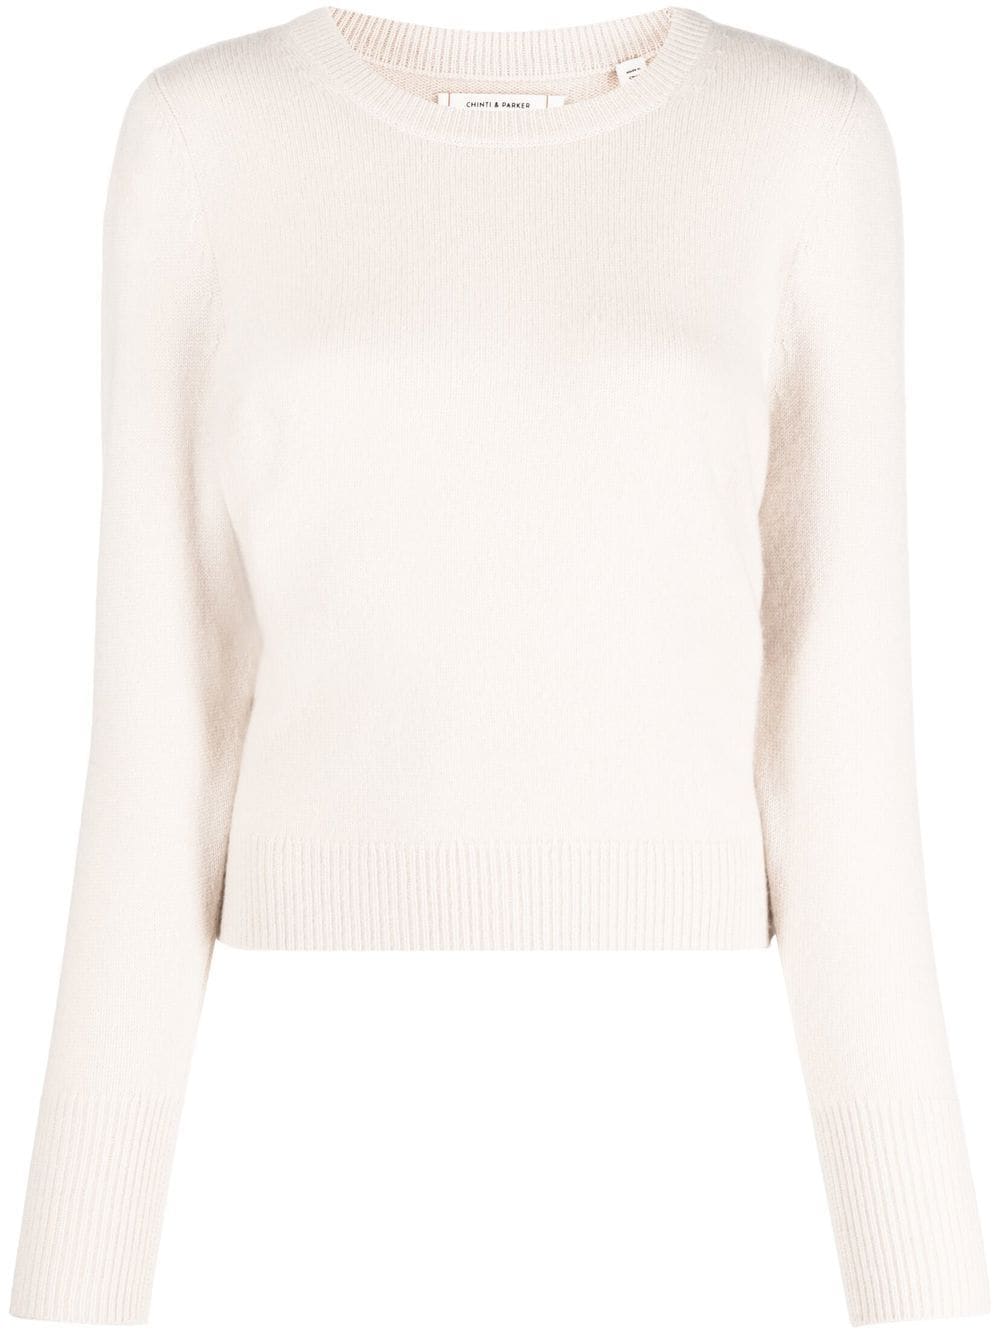 Chinti & Parker ribbed-knit cashmere top - Neutrals von Chinti & Parker